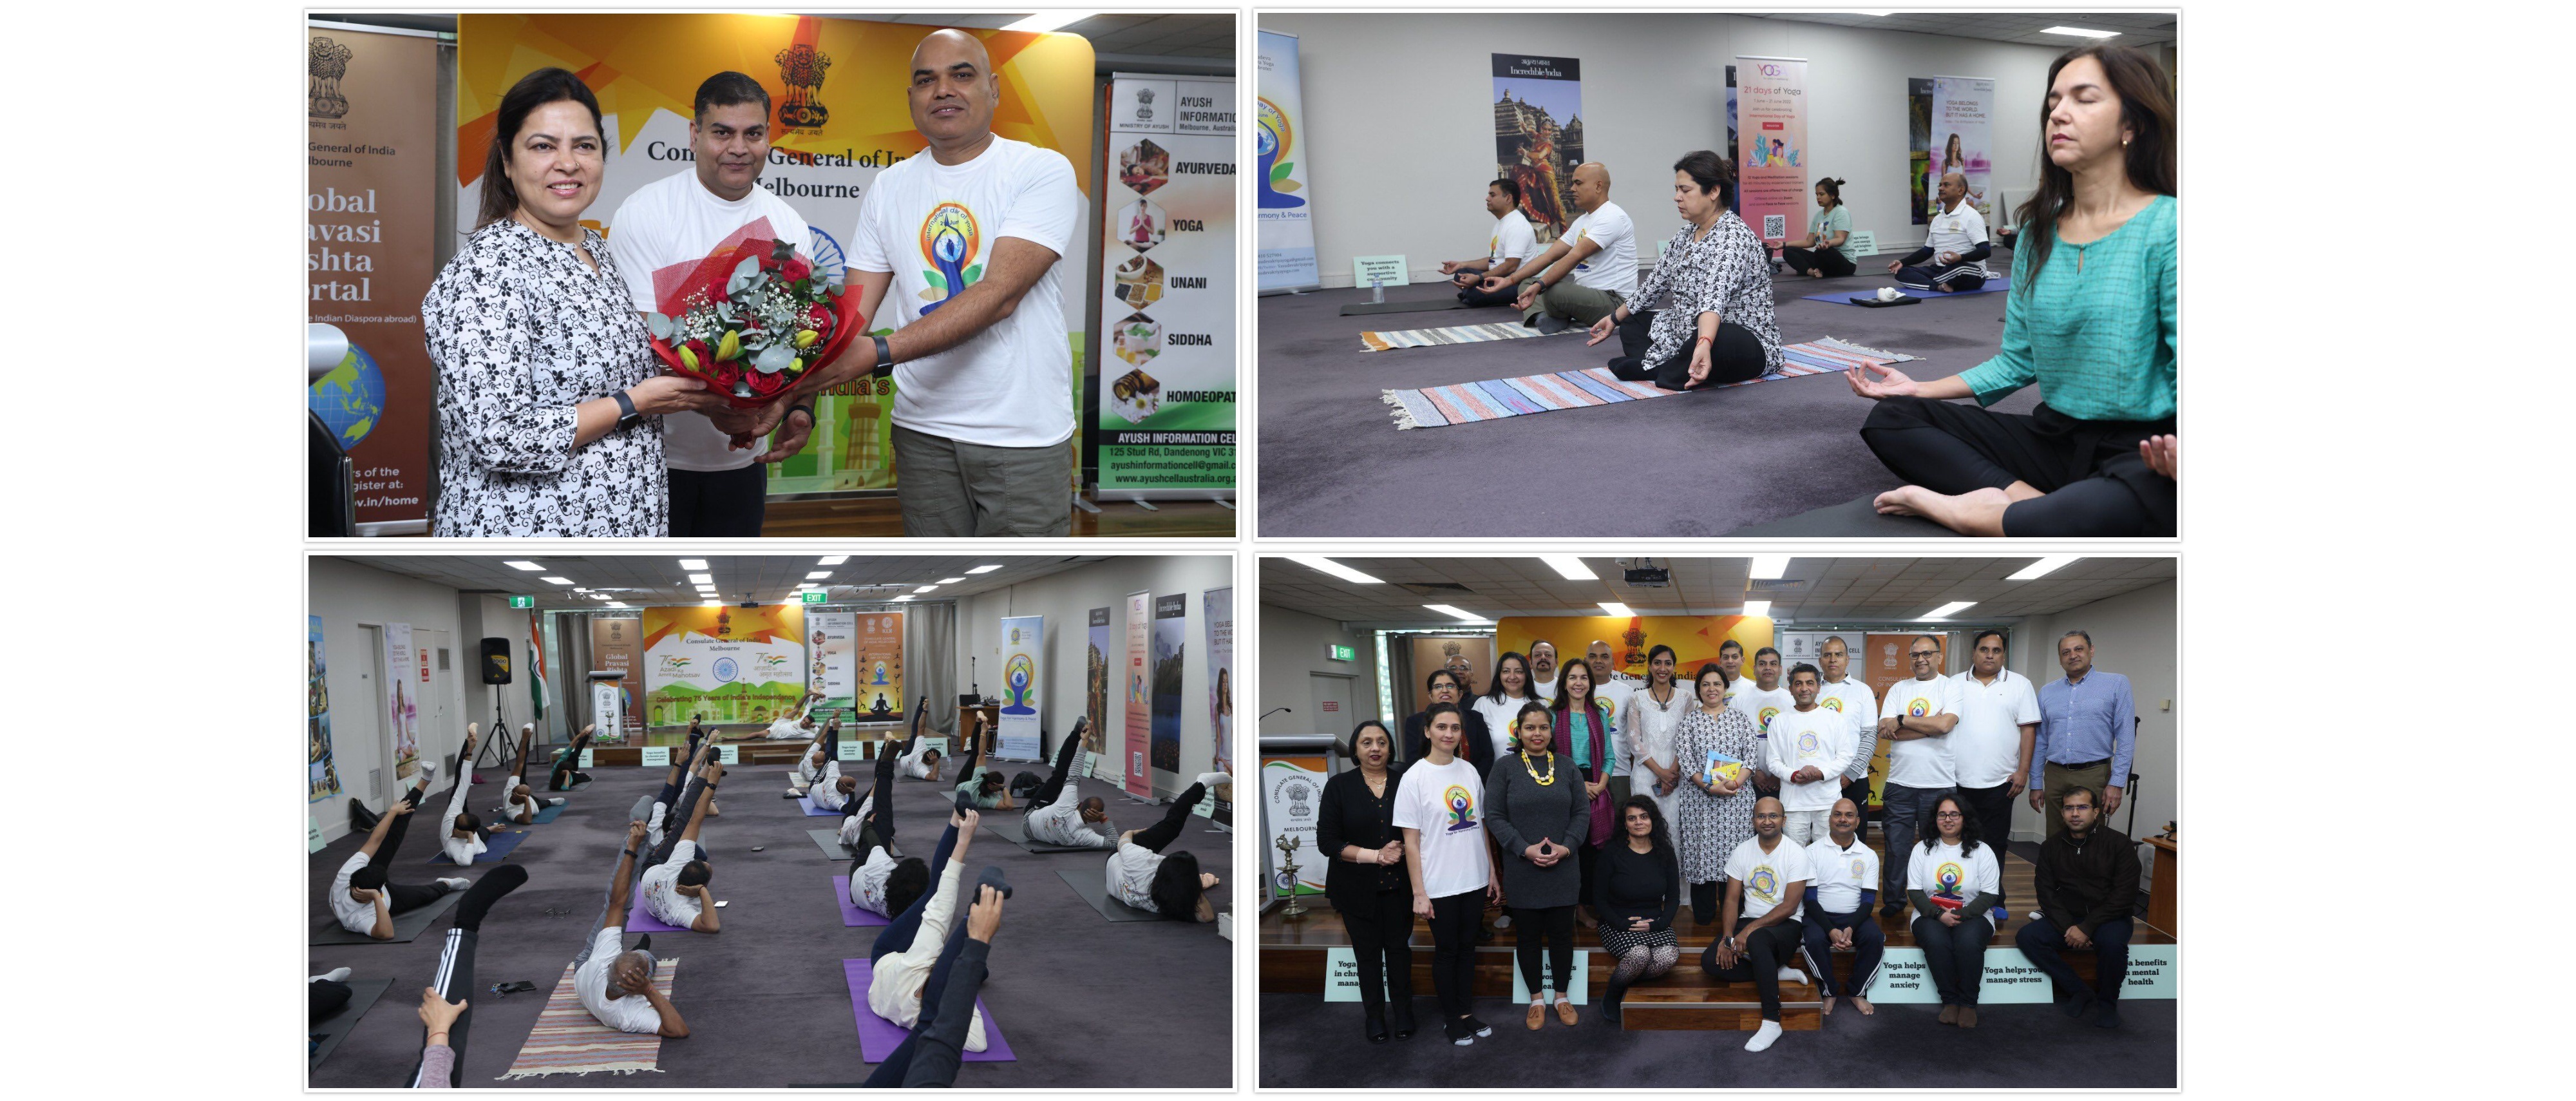  Hon. Minister of State for External Affairs Ms. Meenakshi Lekhi participated in Yoga Session organised at the Consulate
